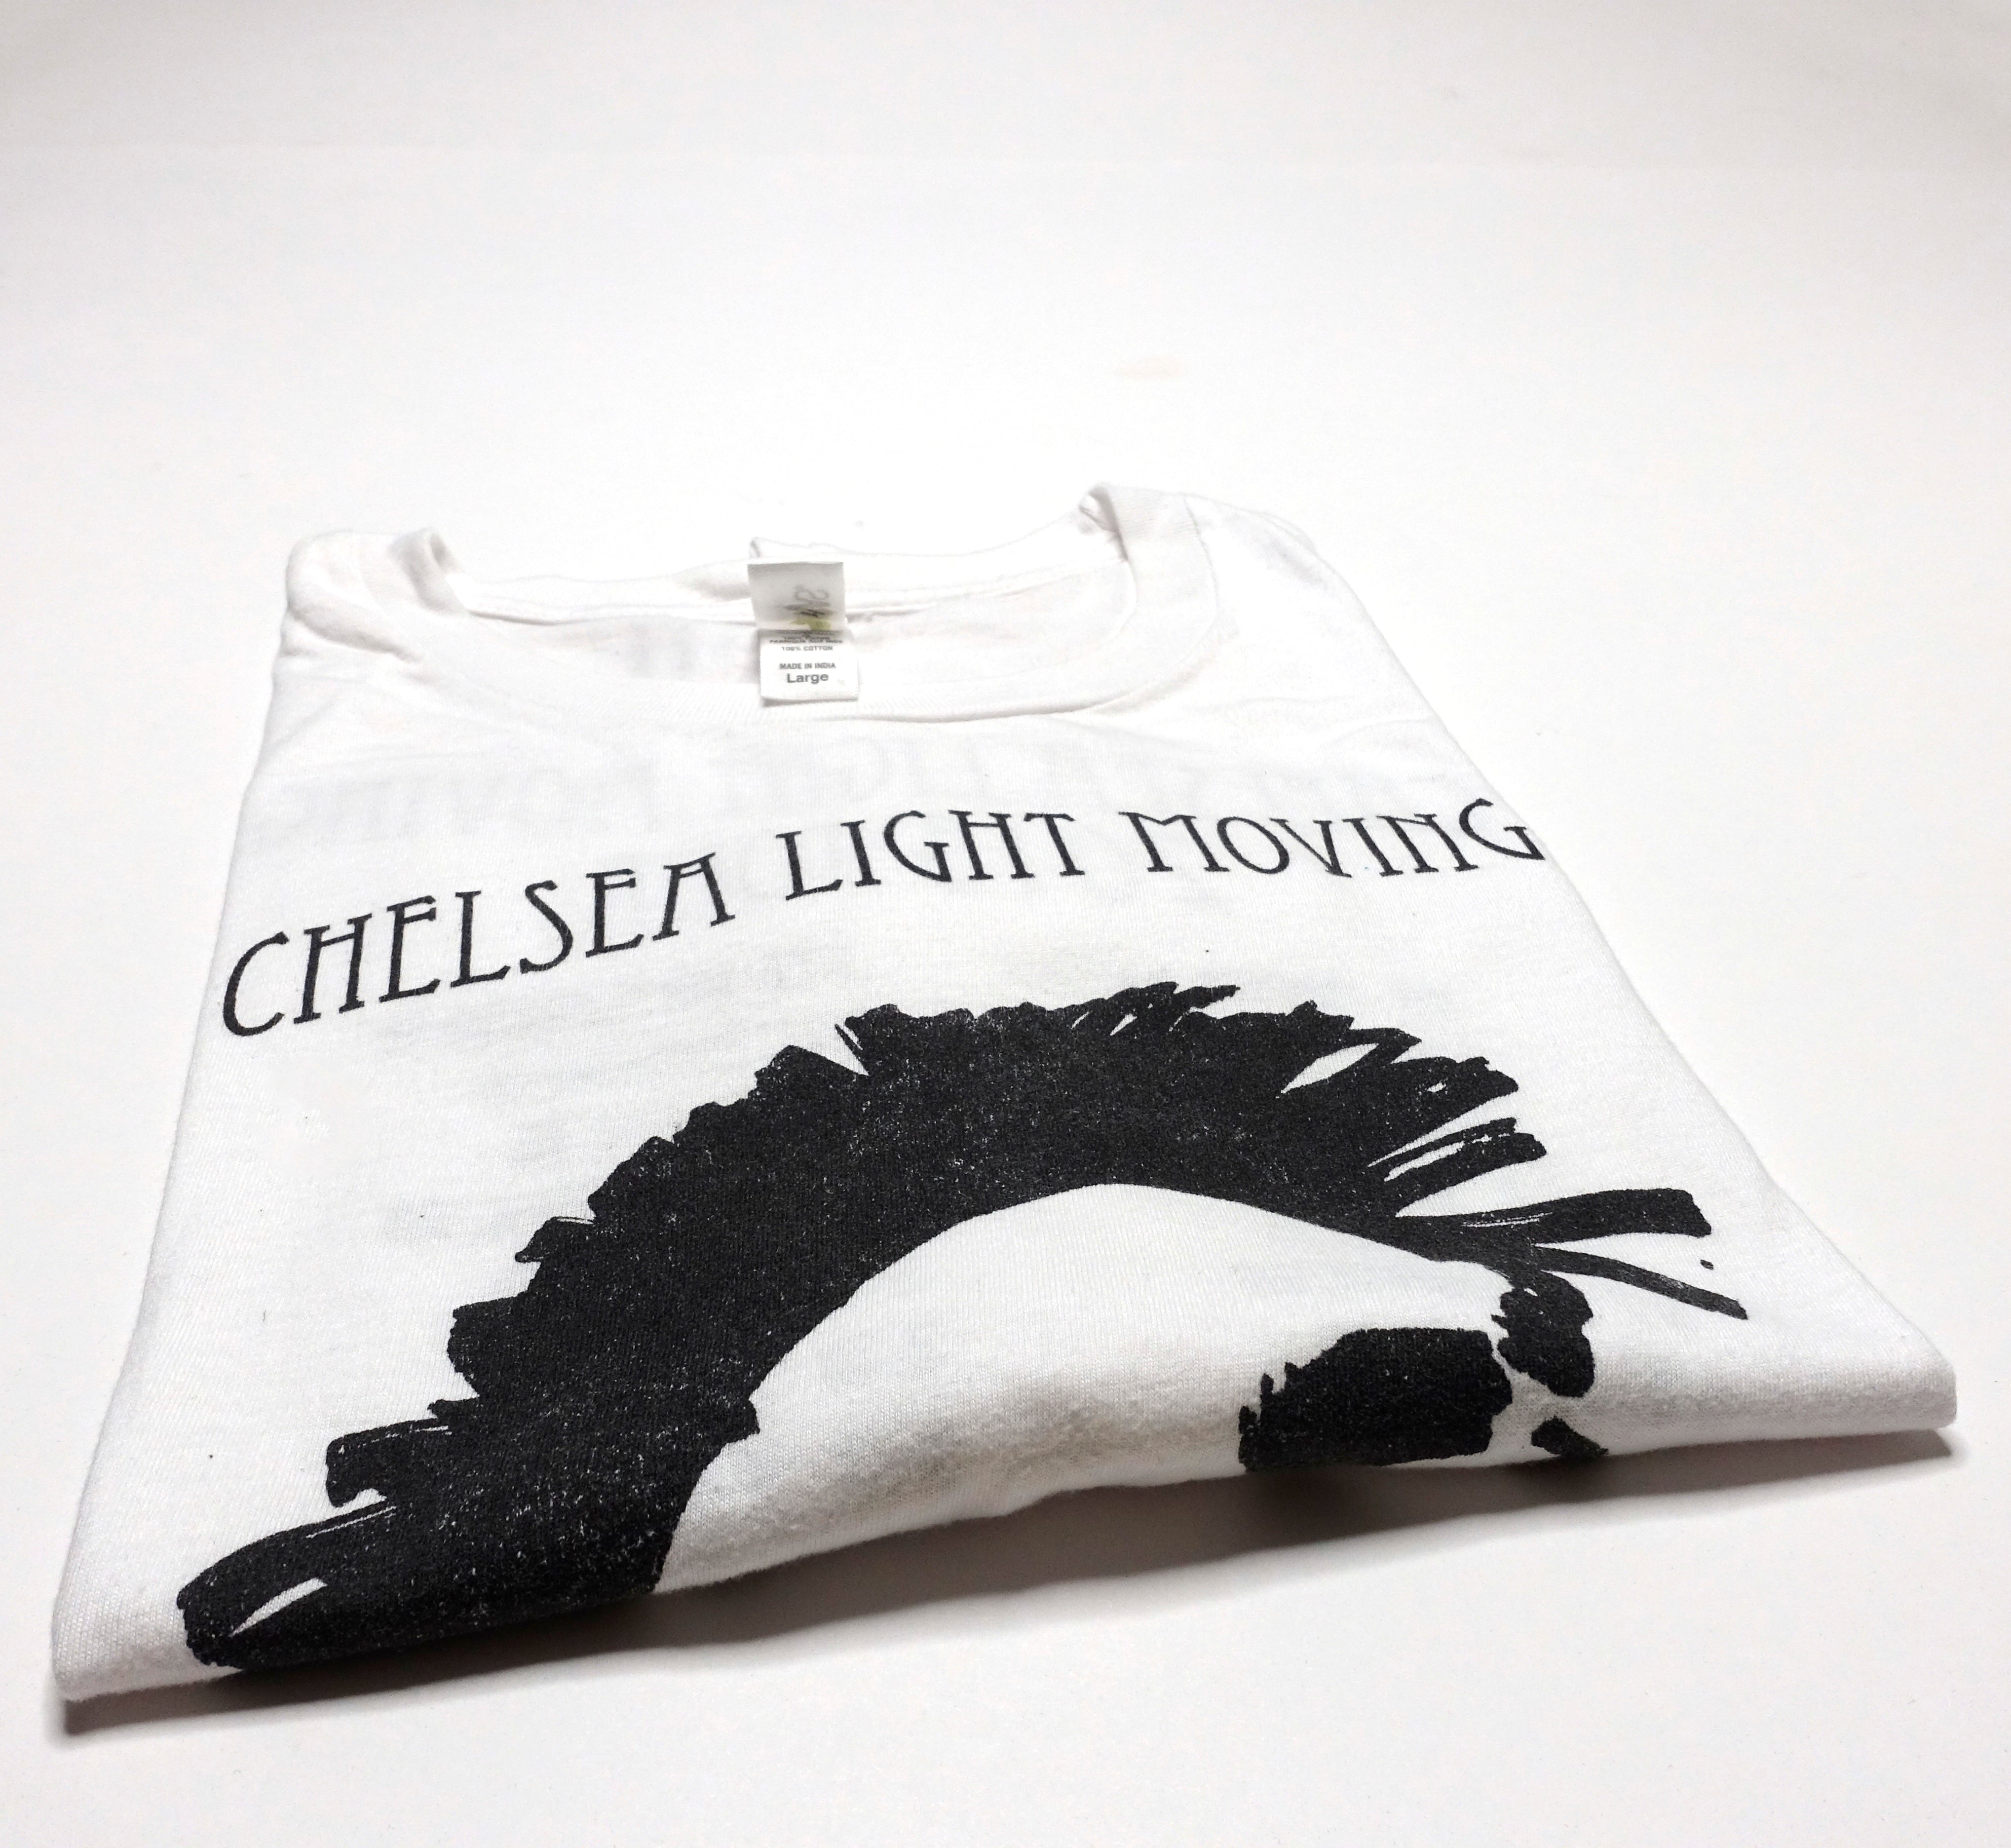 Chelsea Light Moving - 2013 Tour Shirt (Thurston Moore Solo Project) Size Large